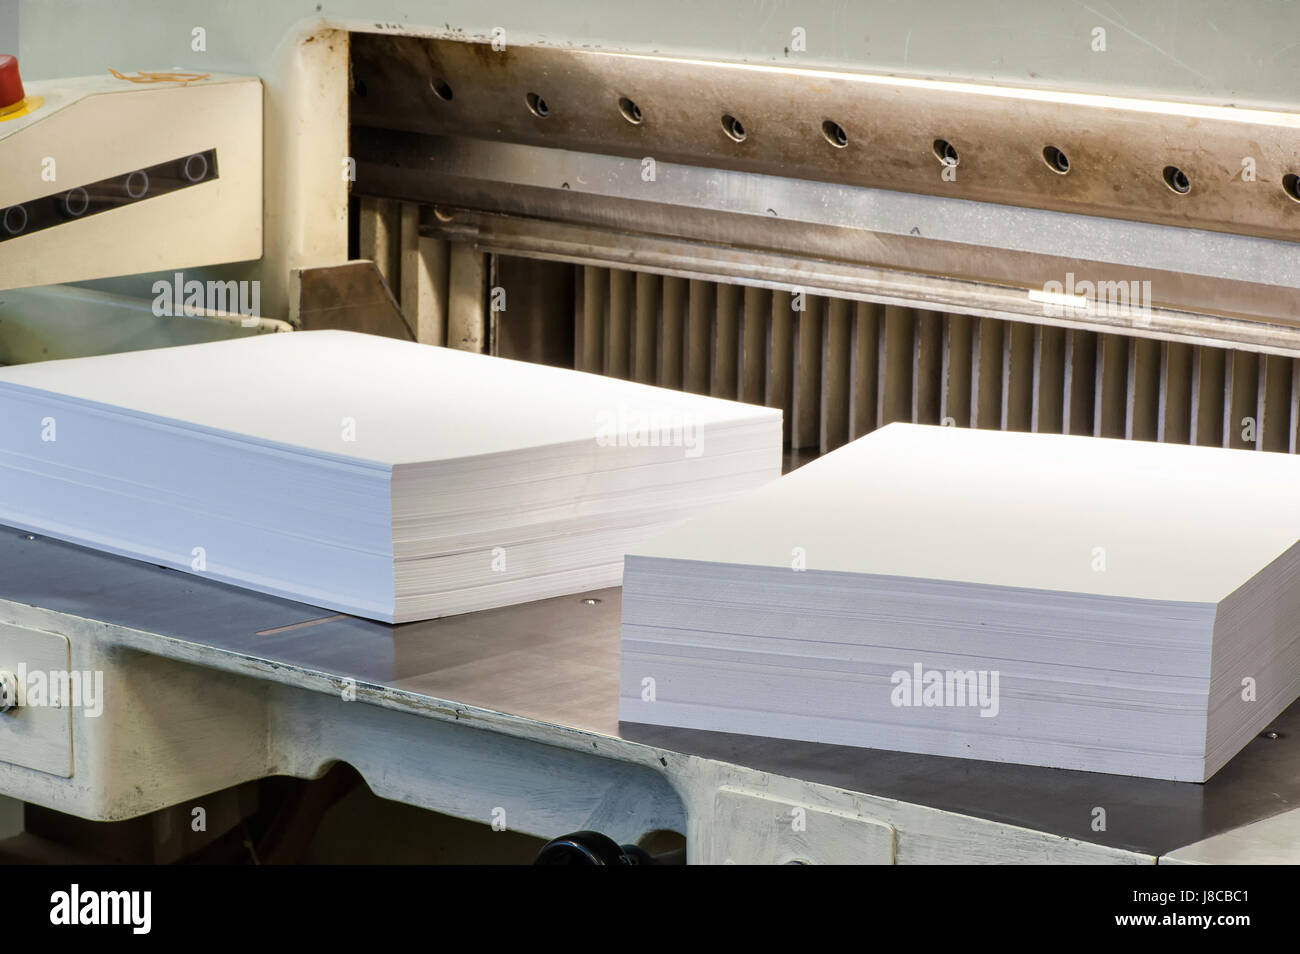 Reams of neatly stacked cut white paper pages on a cutter machine in a print shop in a close up view Stock Photo